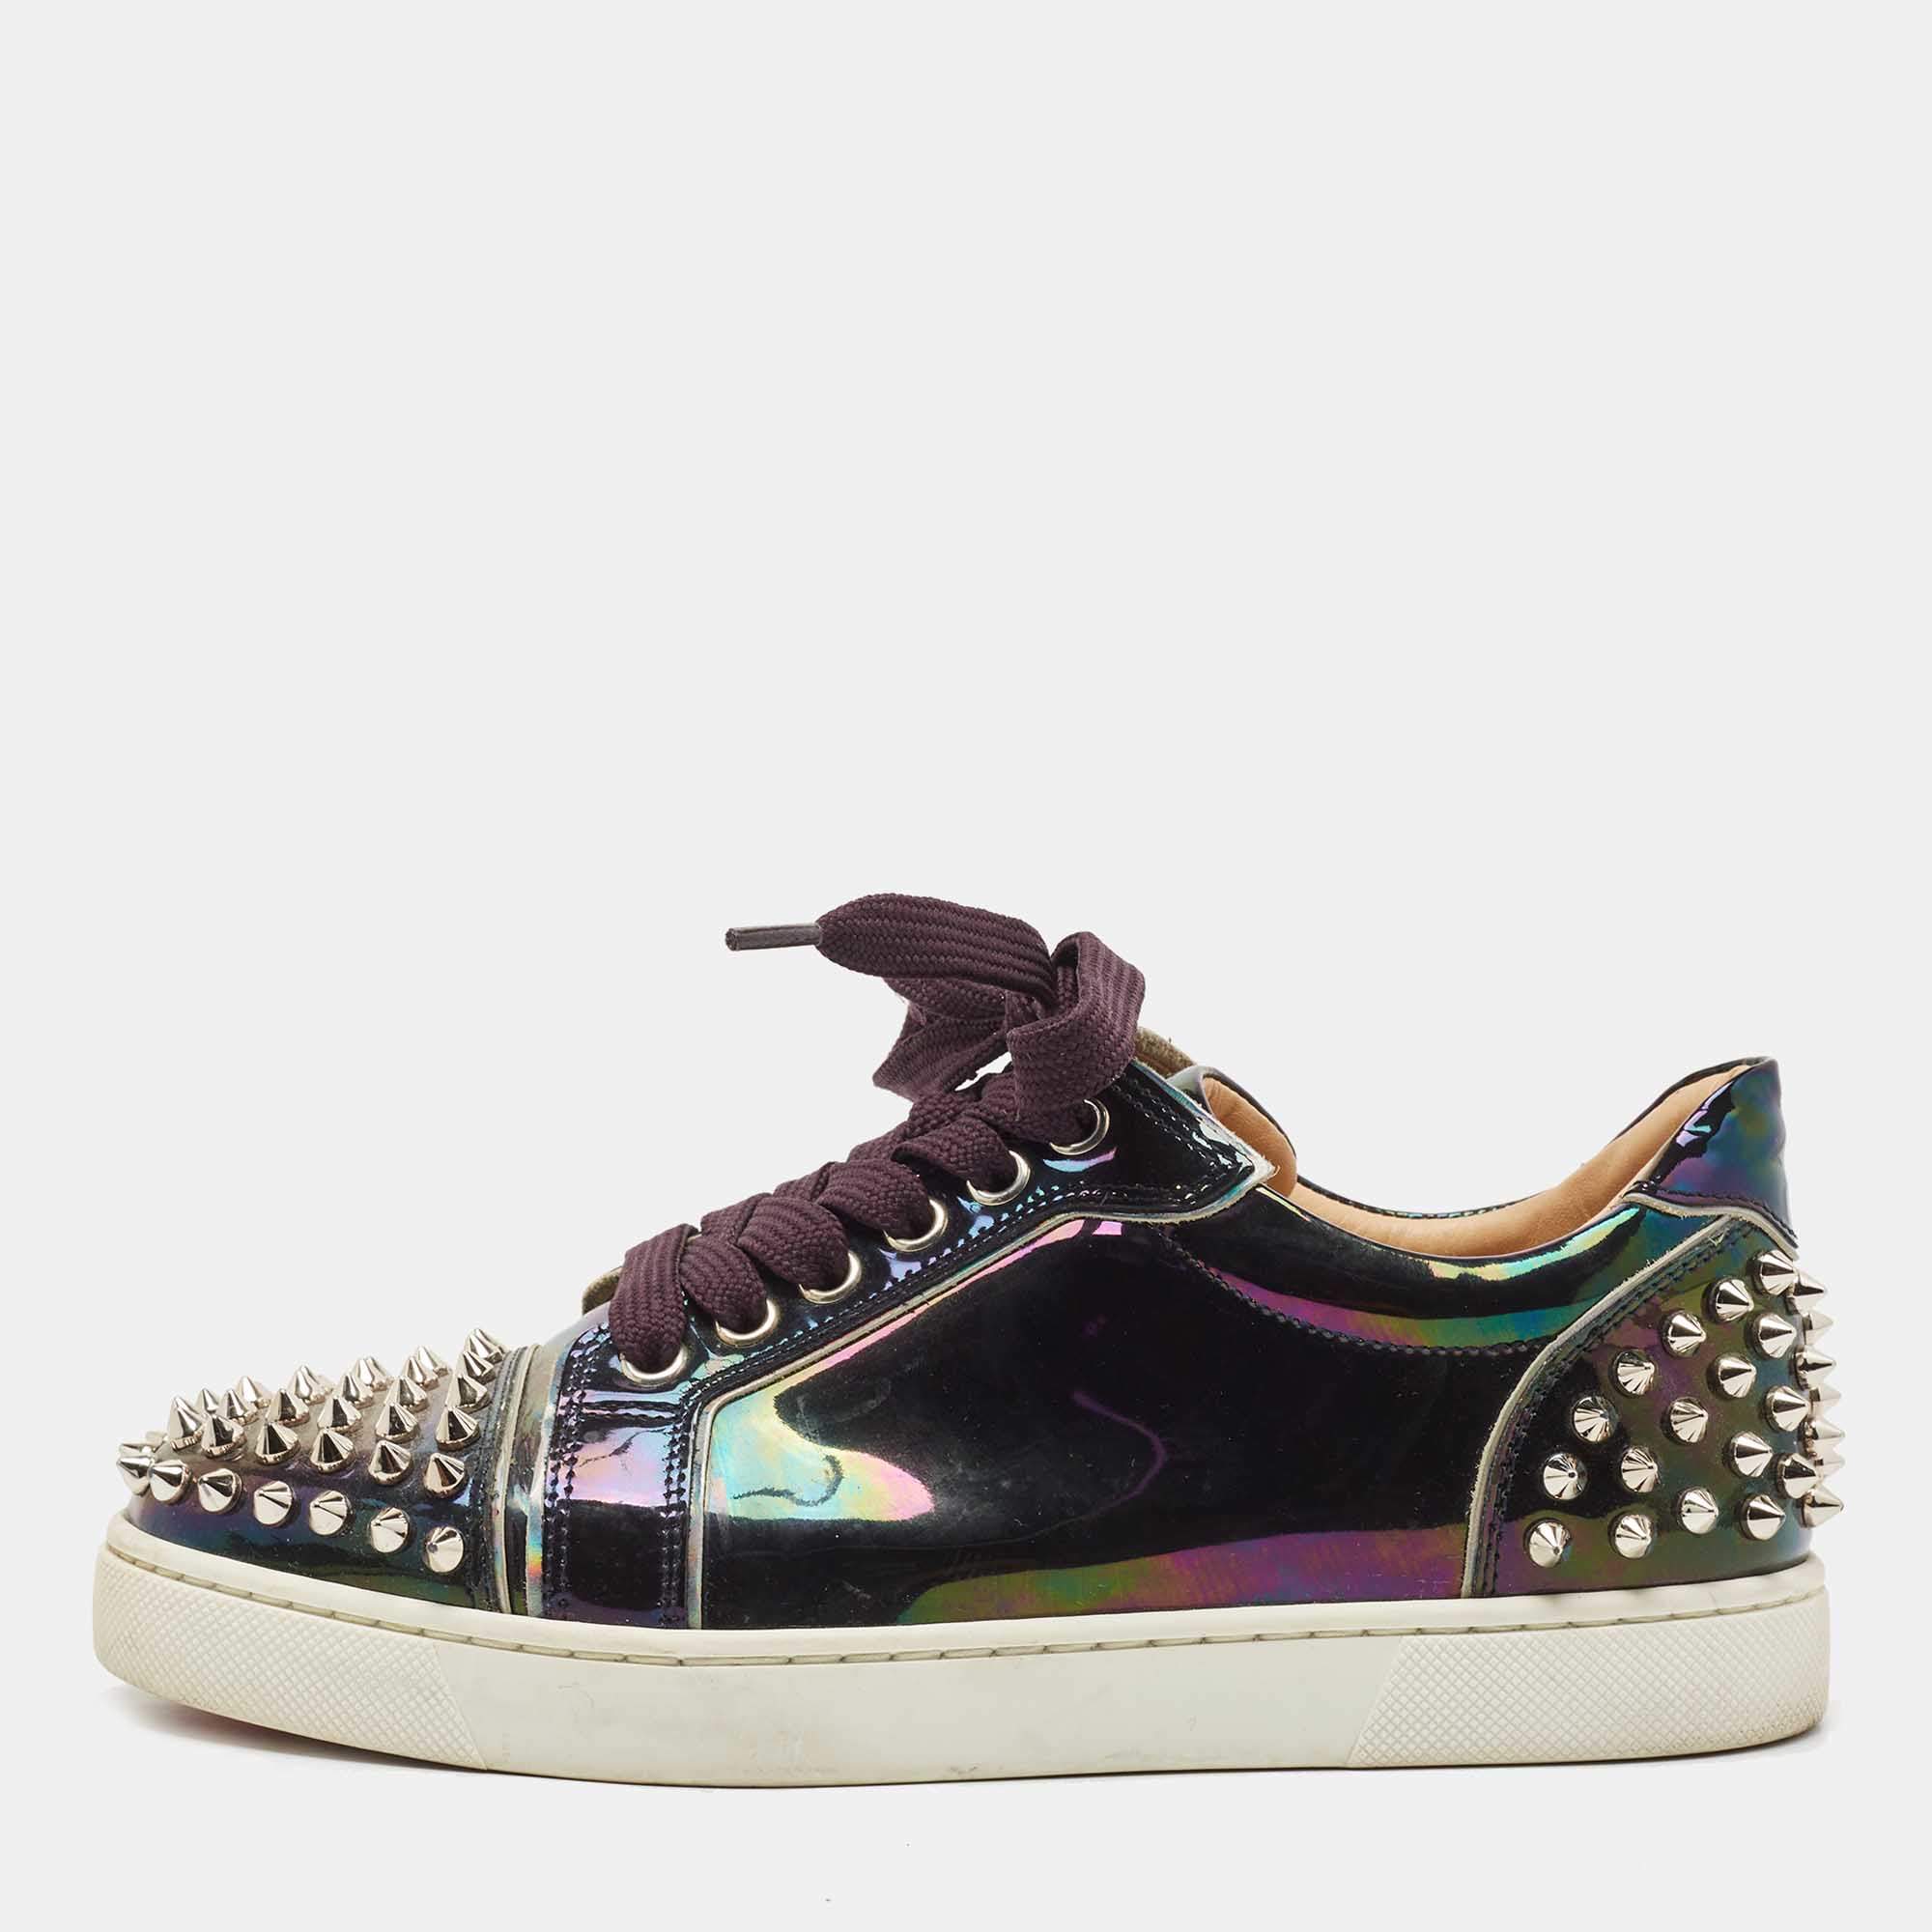 Christian Louboutin Holographic Patent veira Spike Low Top Sneakers Size  36.5 Christian Louboutin